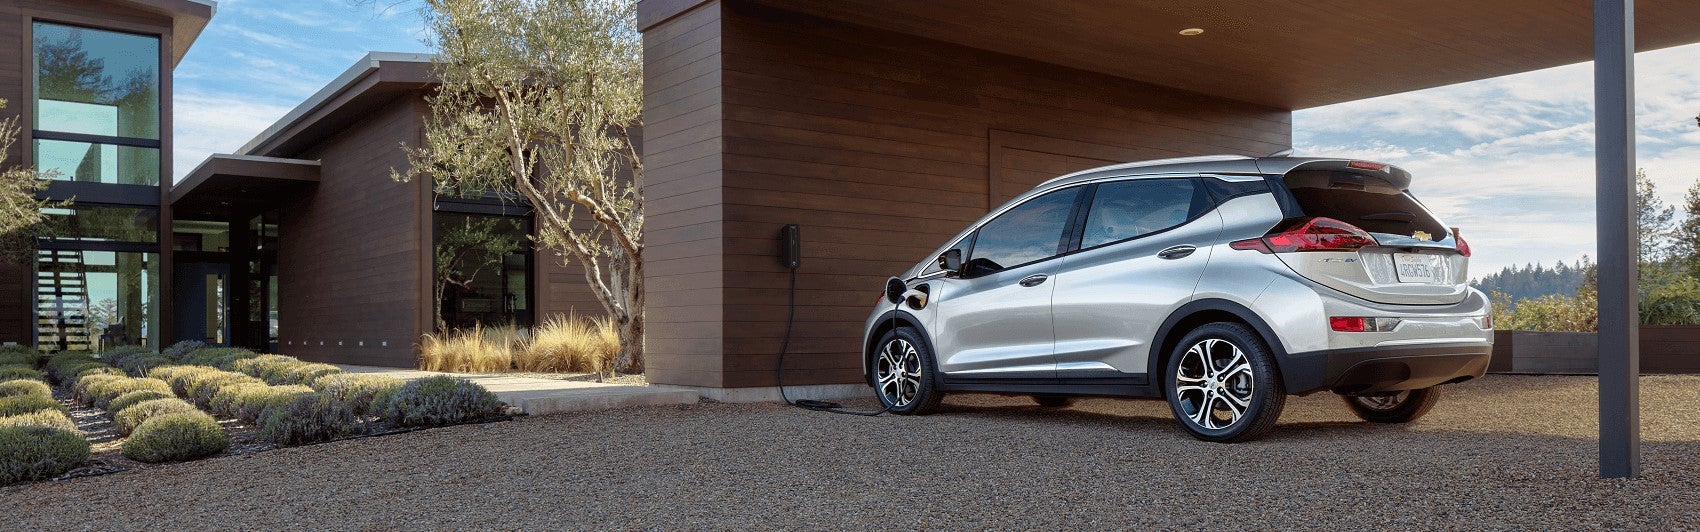 Chevy Bolt Park at Home charging